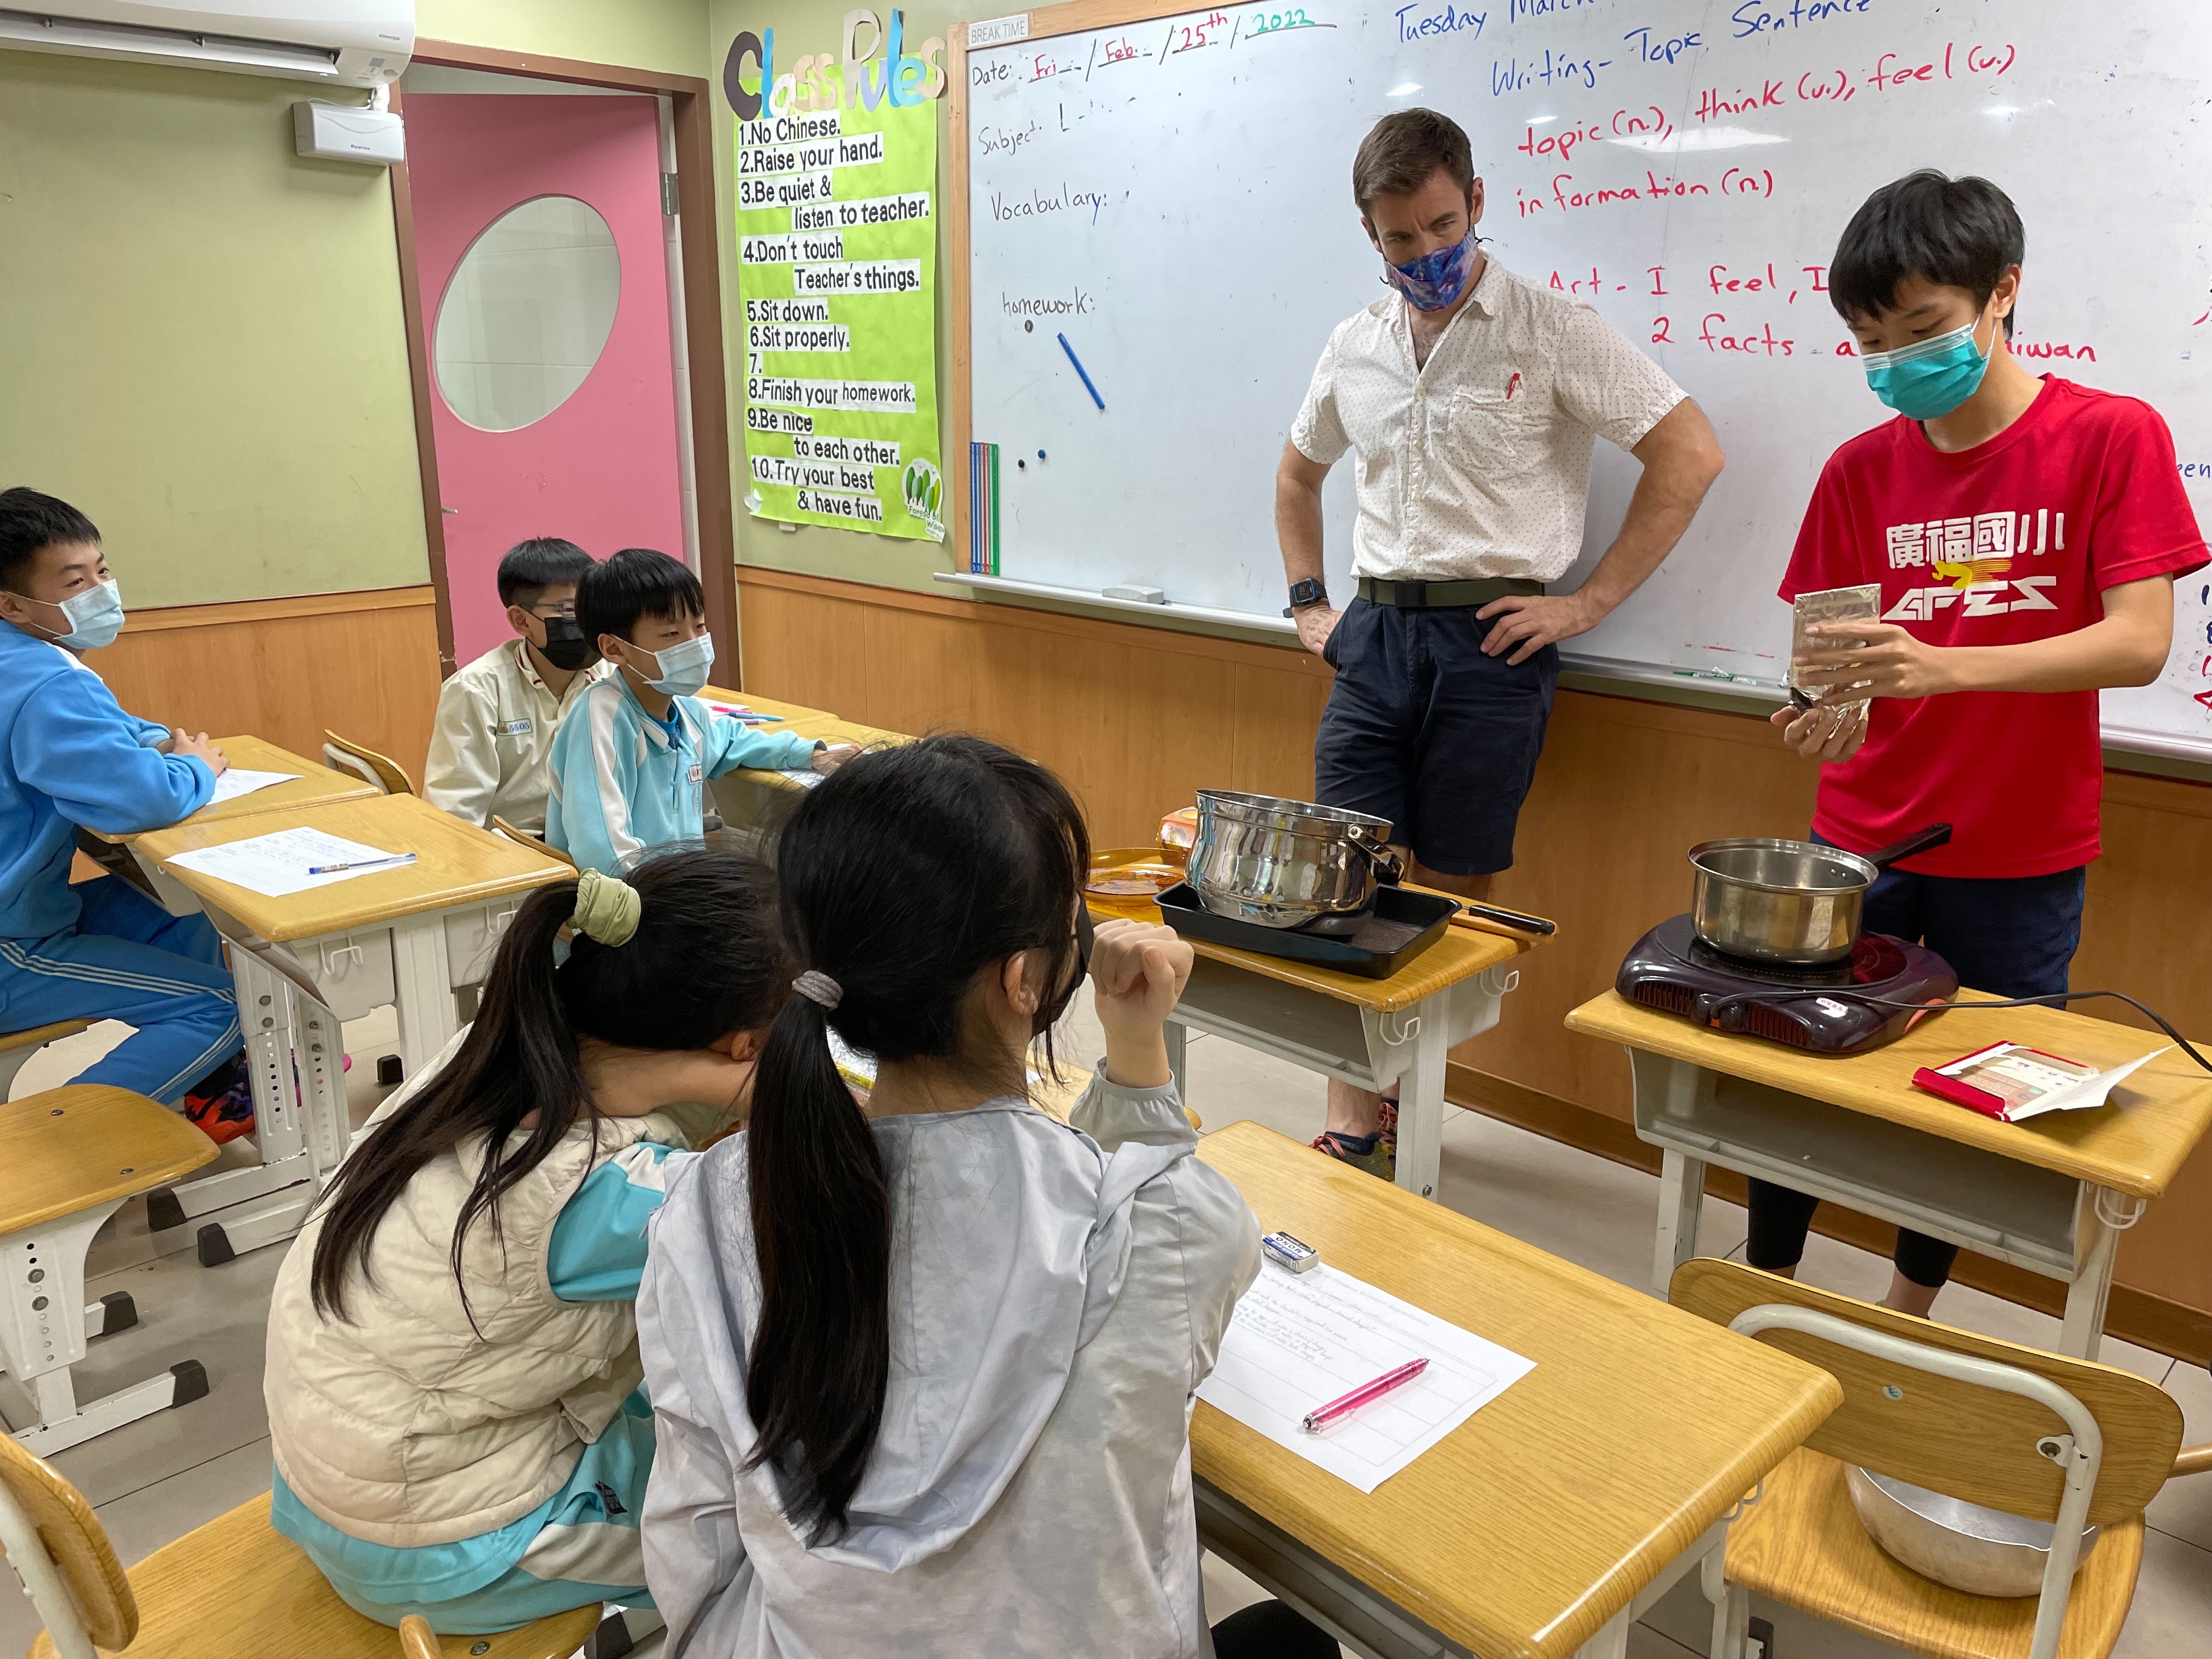 Teaching English and Living in Taiwan Jobs Available 教學工作, Forest of Wisdom English Academy 21 hours weekly - Part time also available - Something COMPLETELY different in Taiwan. An enriching and rewarding curriculum, and an awesome team! image